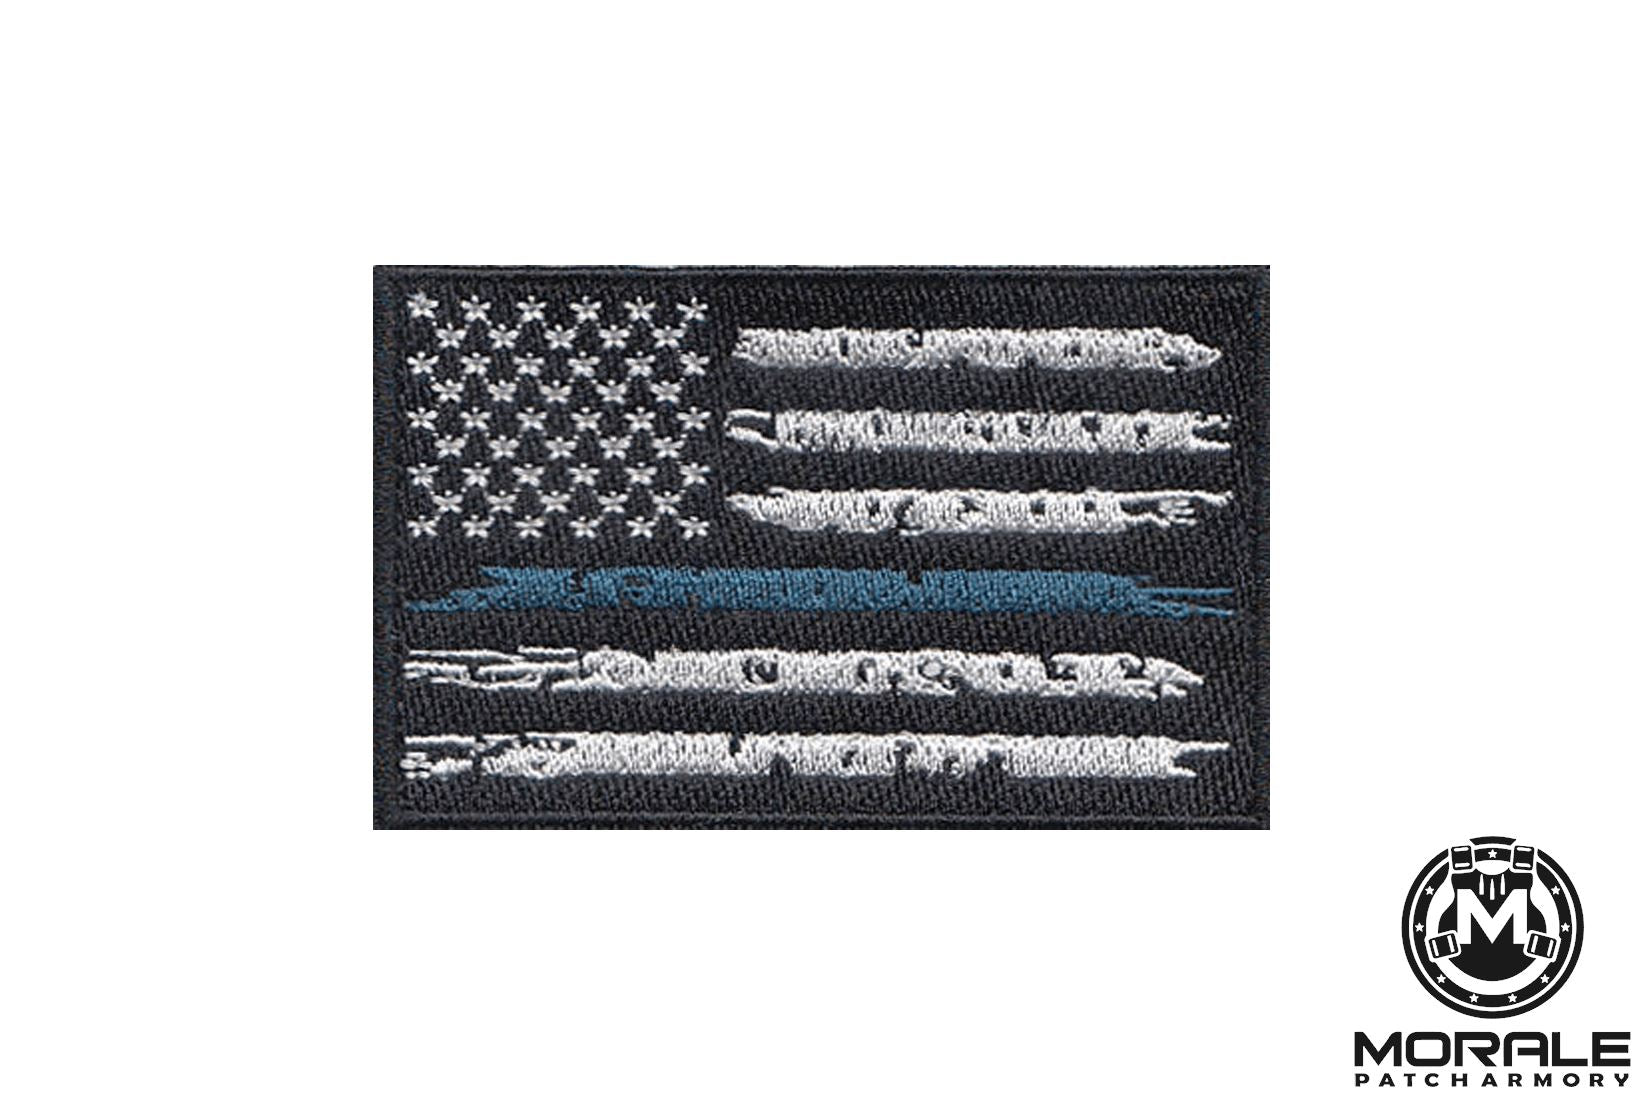 Thin Blue Line Flag Patch, Embroidered 2 x 3 Morale Patch w/ Velcro/Hook Backing - Choose Right or Left - Thin Blue Line / Stars on Right